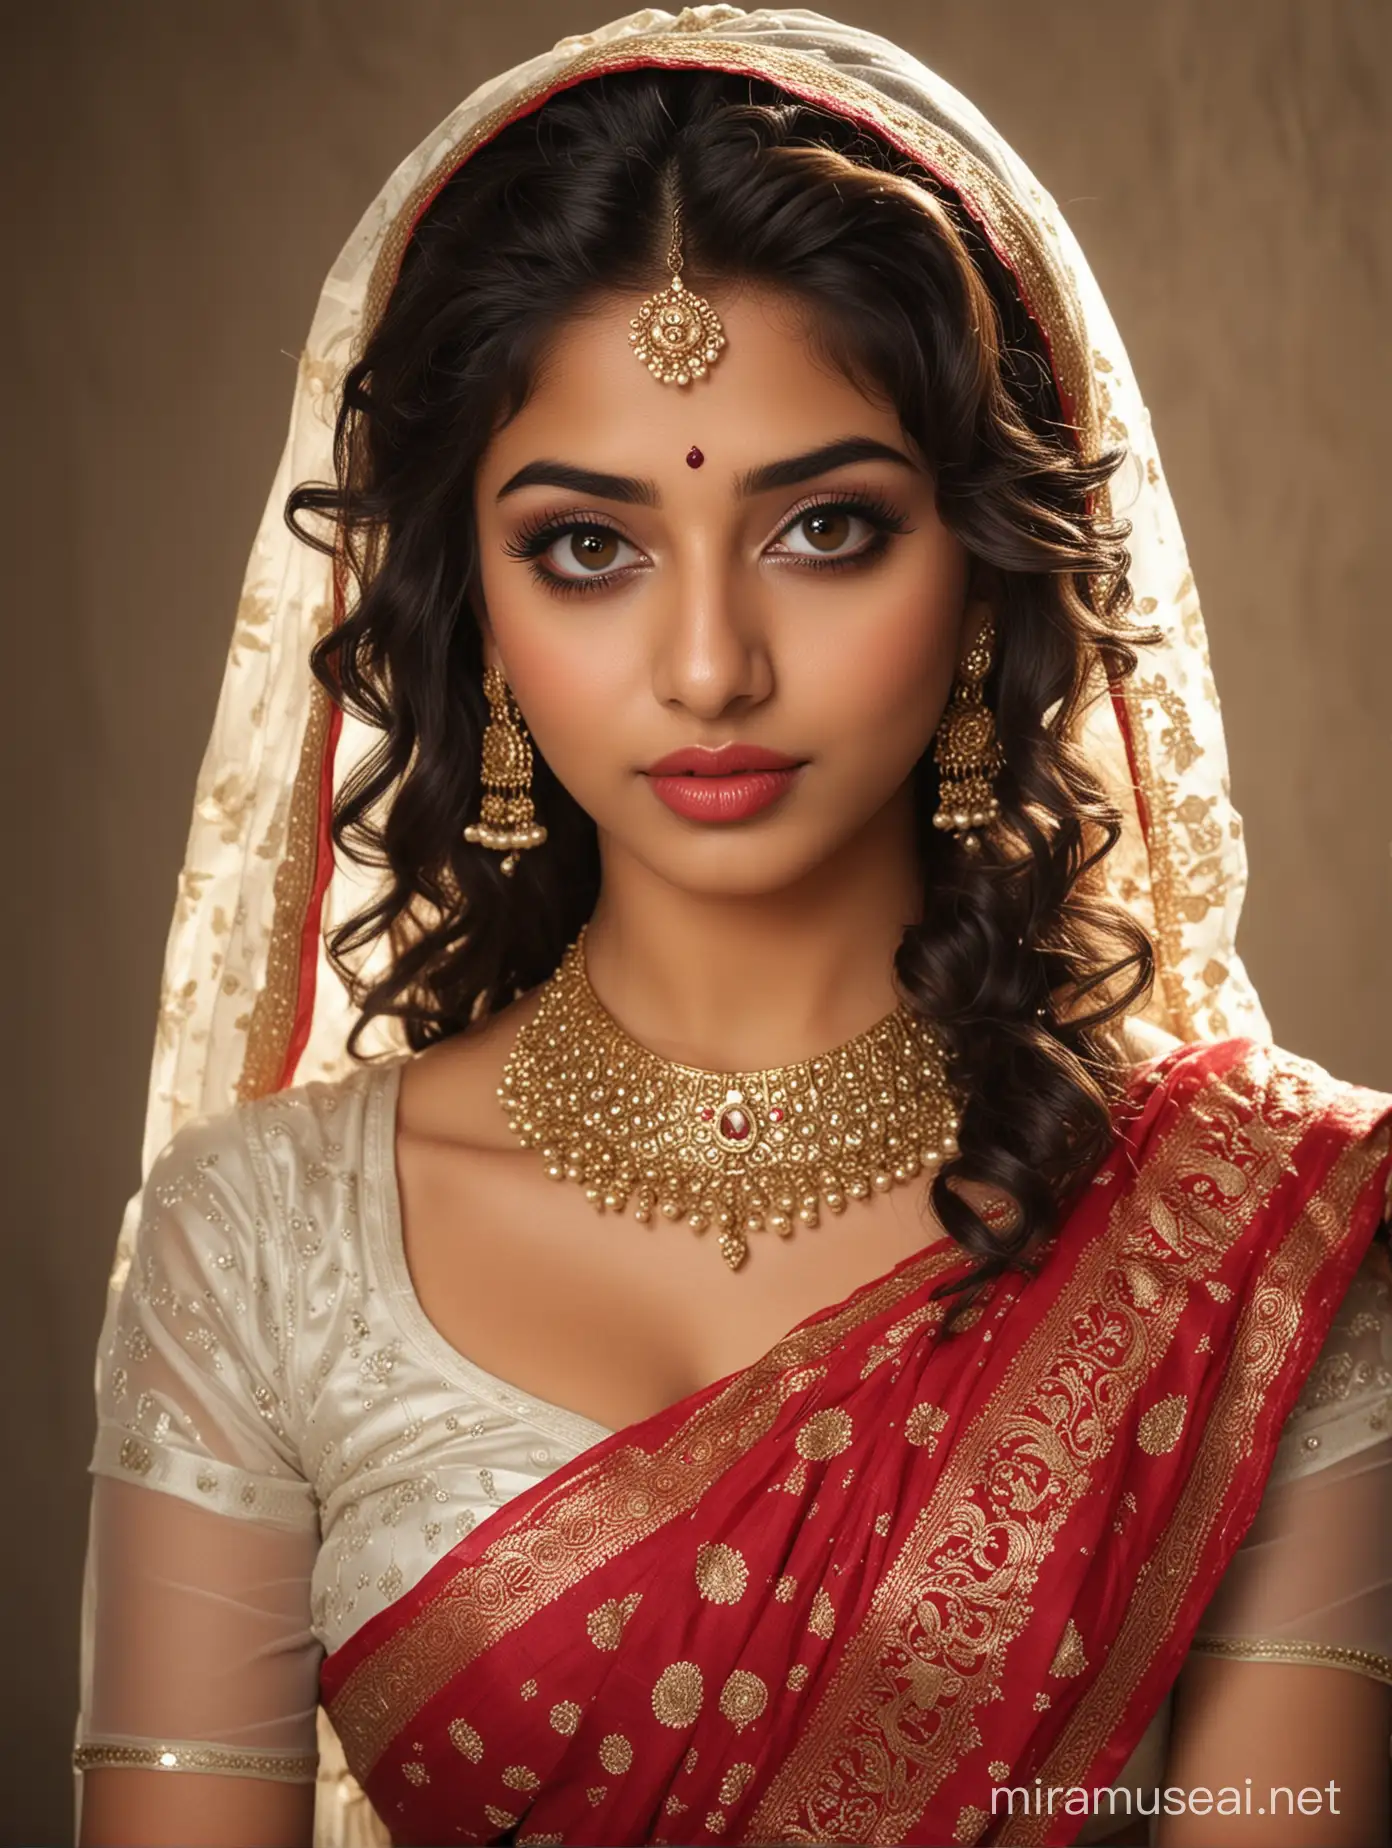  most beautiful 18 YEAR OLD  indian GIRL, big wide black eyes with eye makeup, thick long curly hair , face completely bent down, wide big eyes, brows raised, eyes looking up, innocent alluring sexy looks, shy wide smile, intimate looks, bridal makeup, full body jewelry, perfect symmetric face and eyes, full breasts, glossy dark red lipsticks, intimate alluring come get me looks vulnerable i am yours feeling in looks, elegant traditional modest saree , elegant look, biting lip with ecstasy,
blushed cheeks, intricate details, photo realistic, 4k.